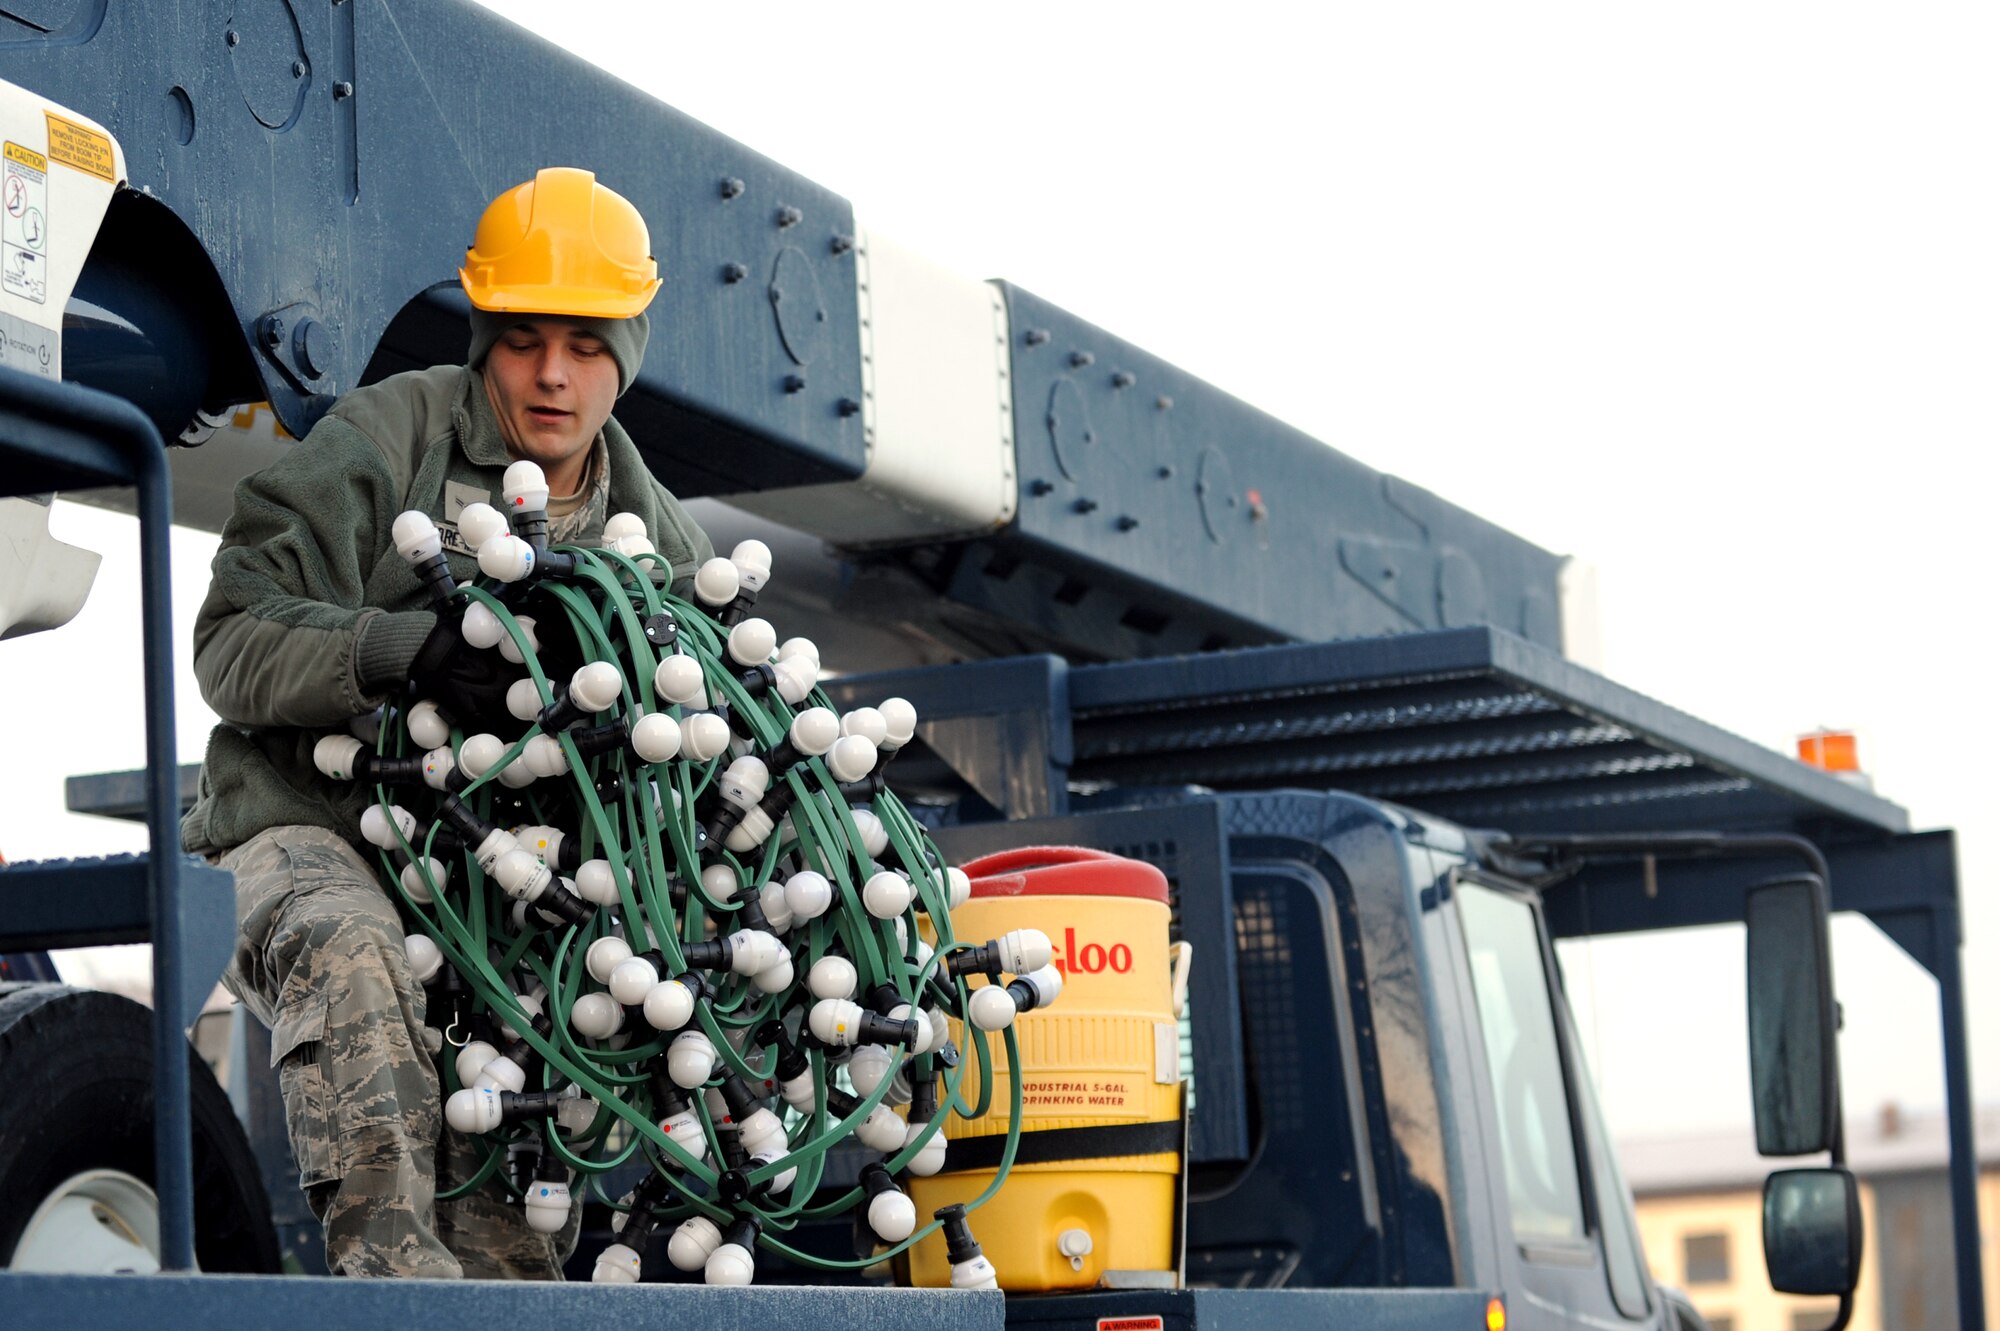 SPANGDAHLEM AIR BASE, Germany – Airman 1st Class Clayton Score-Mehrens, 52nd Civil Engineer Squadron electrical-systems apprentice, lifts decorative lights to be placed on the base’s holiday tree here Nov. 28. The electric shop is responsible for maintaining and repairing the base’s electrical infrastructure. (U.S. Air Force photo/Airman 1st Class Matthew B. Fredericks)